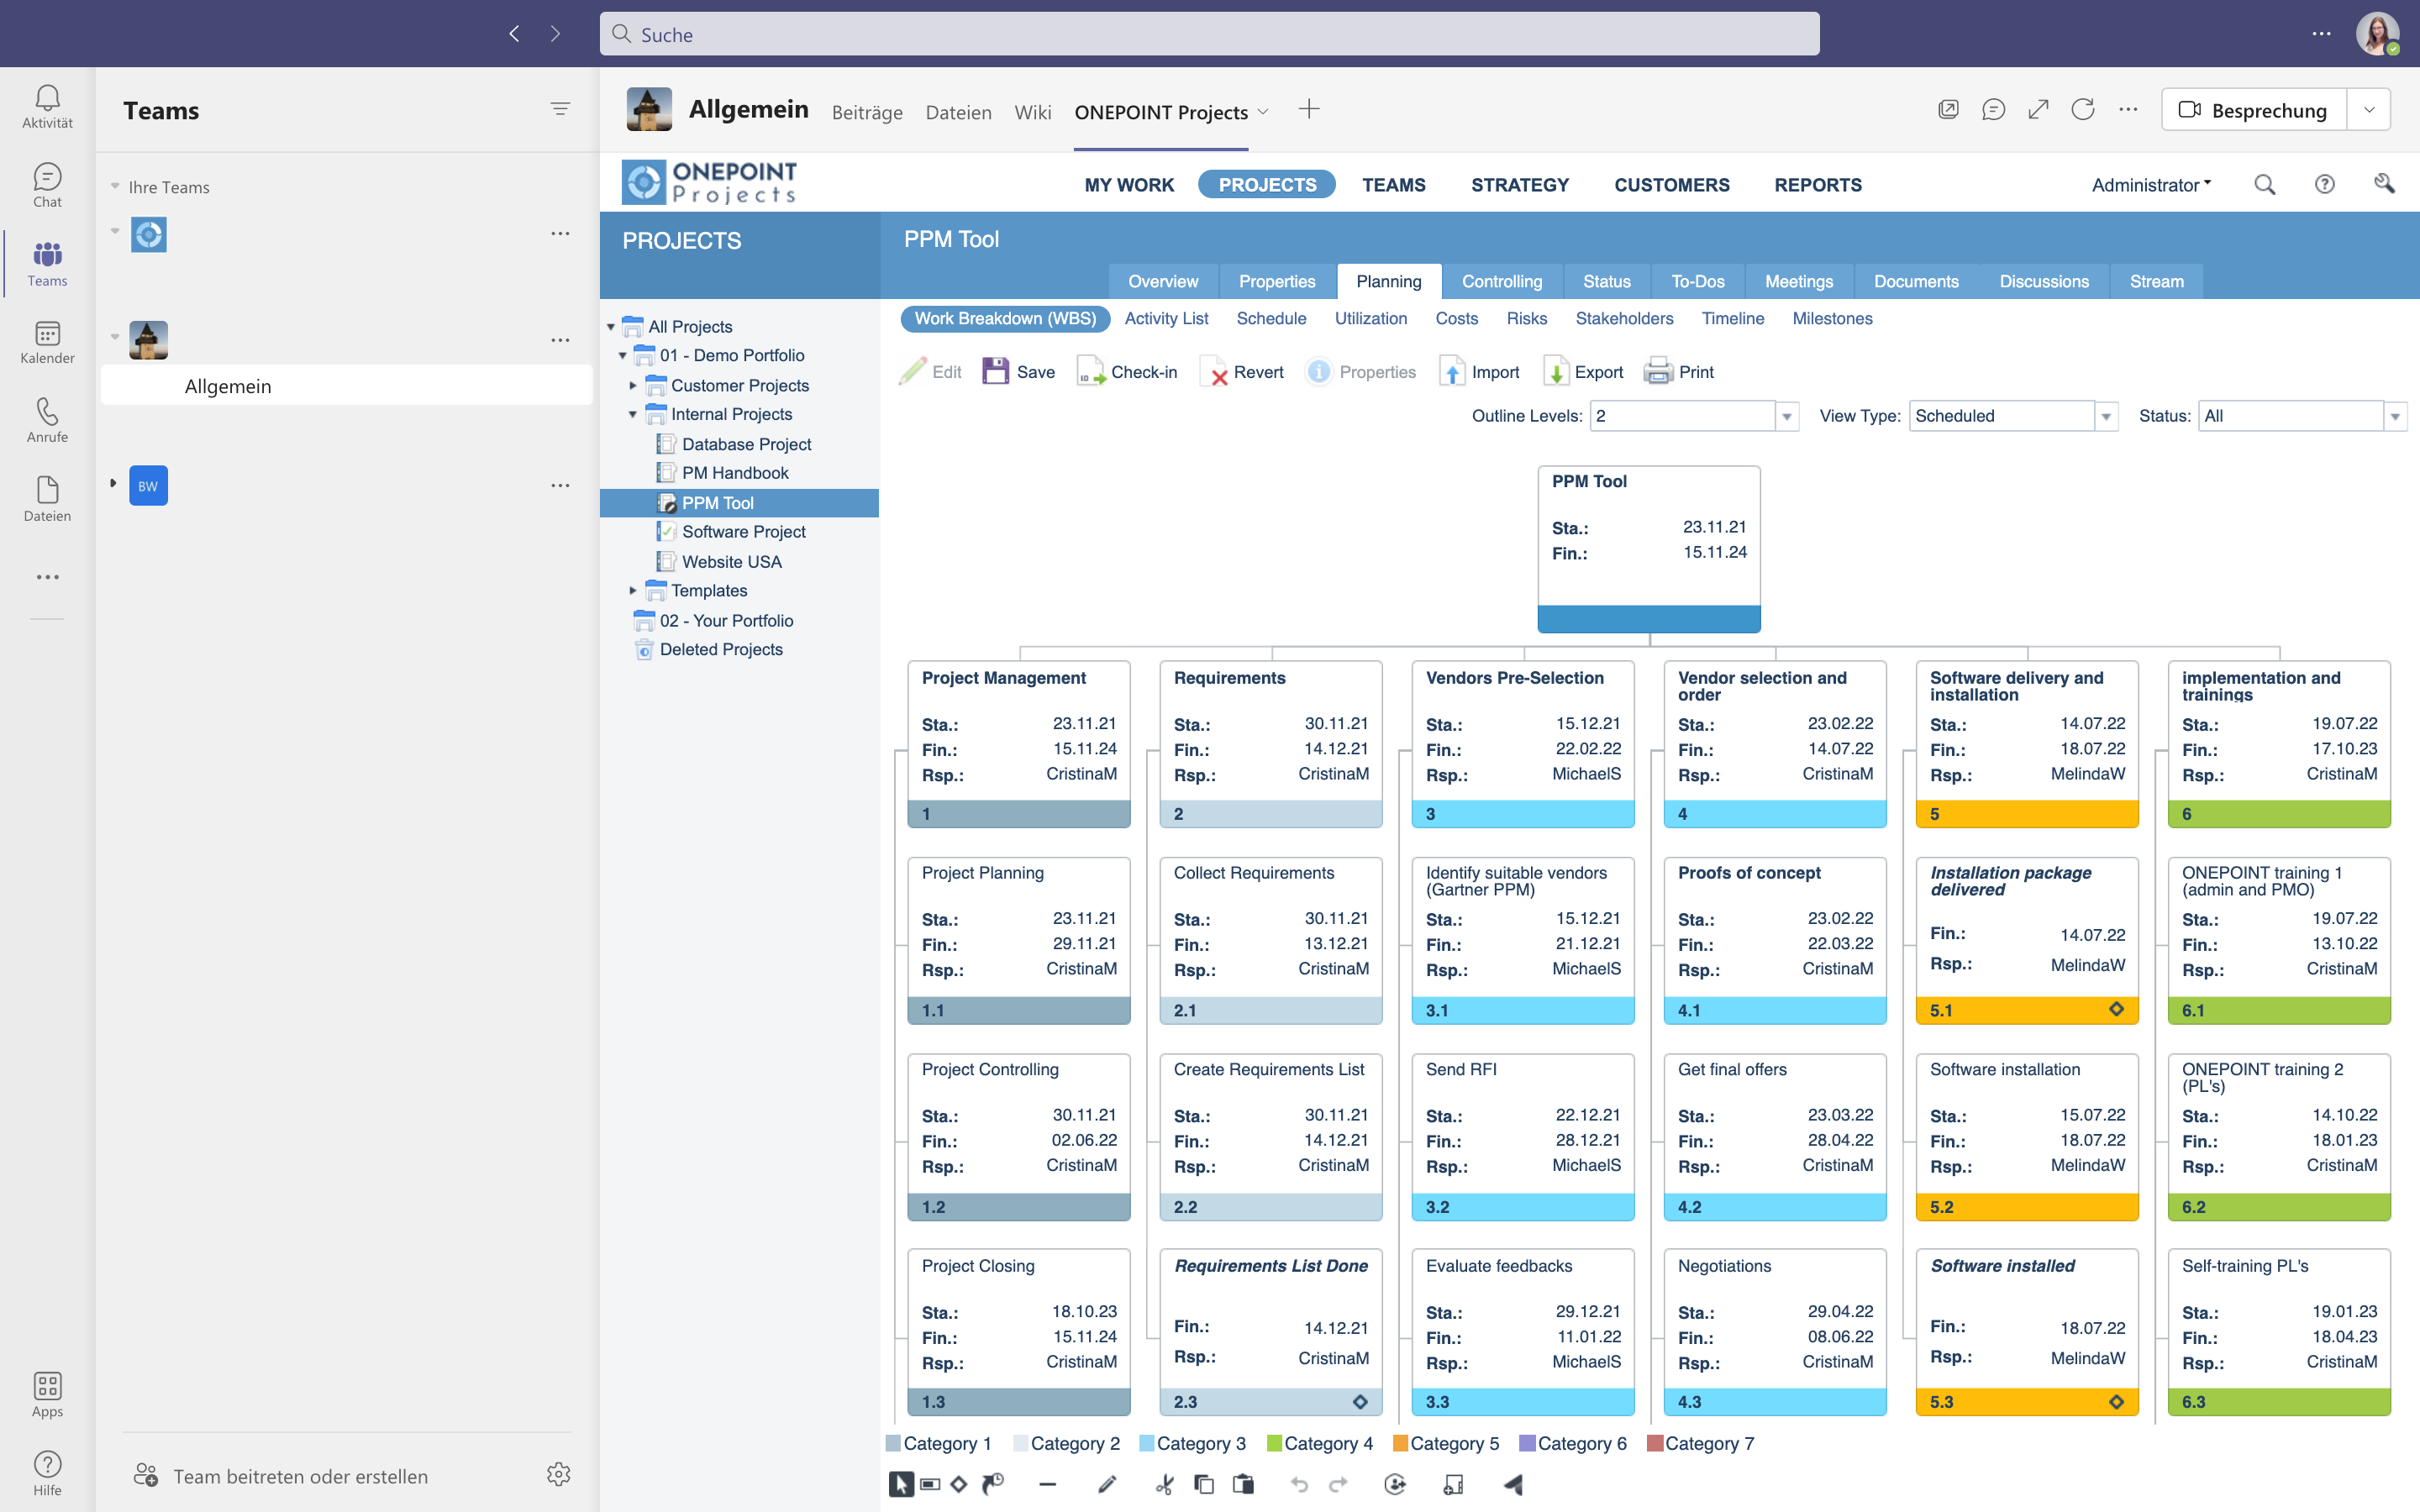 Microsoft Teams Integration by ONEPOINT